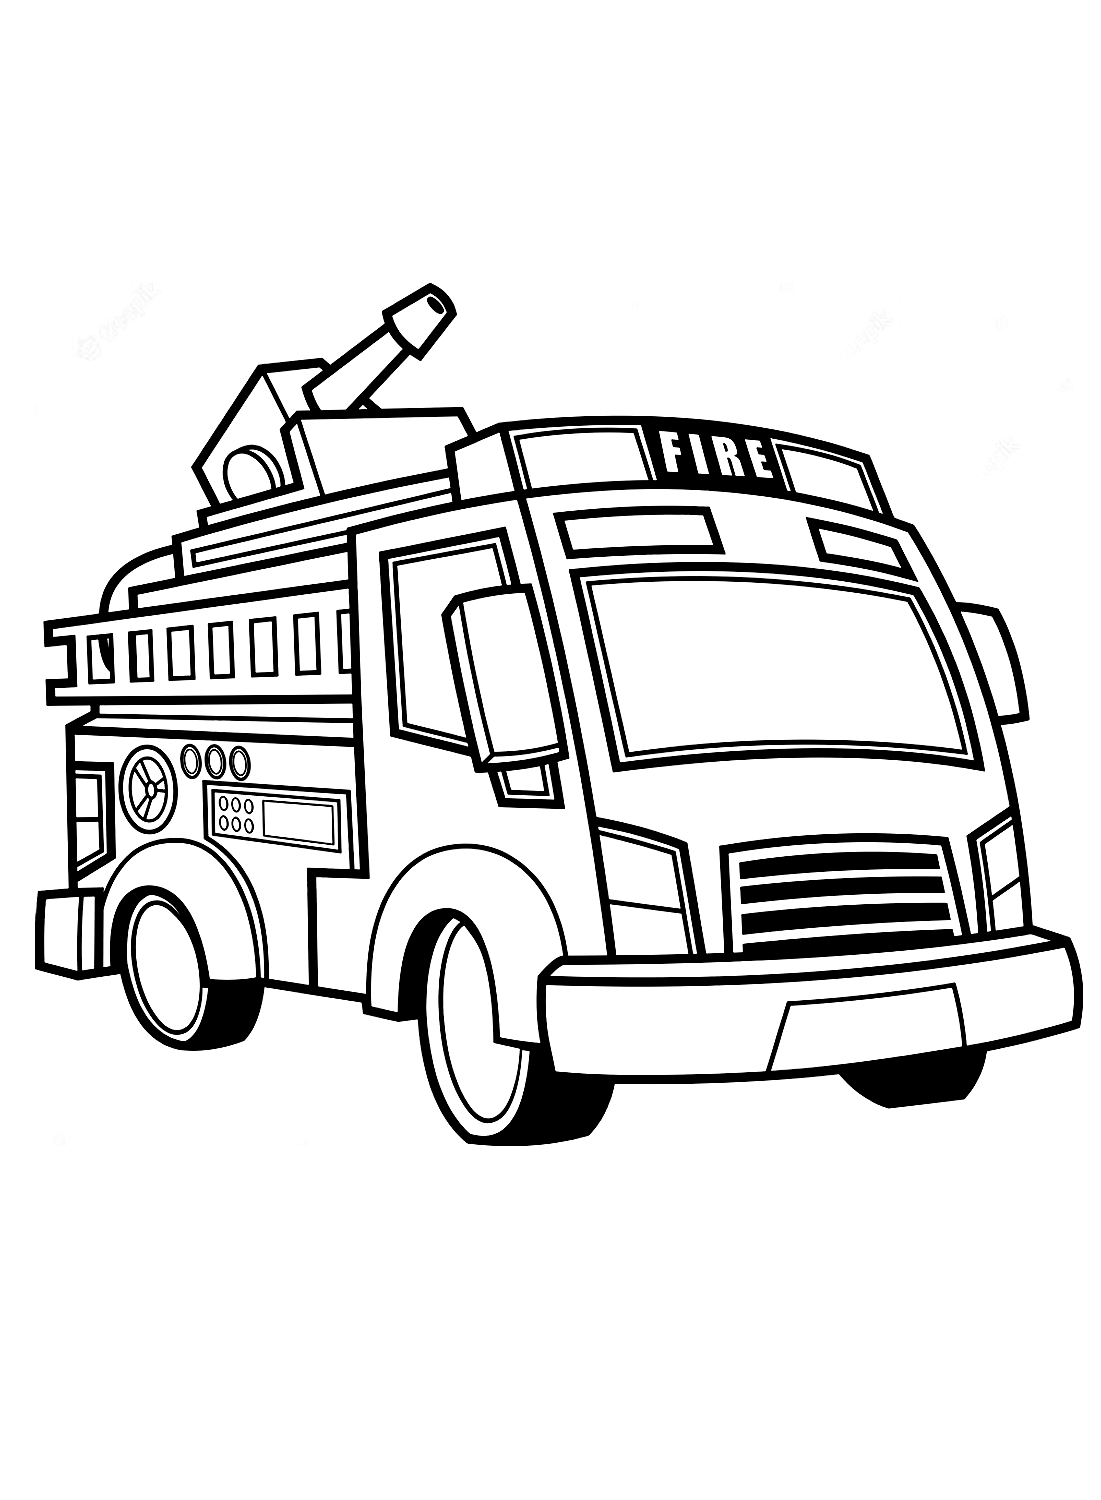 Firetruck printable coloring page